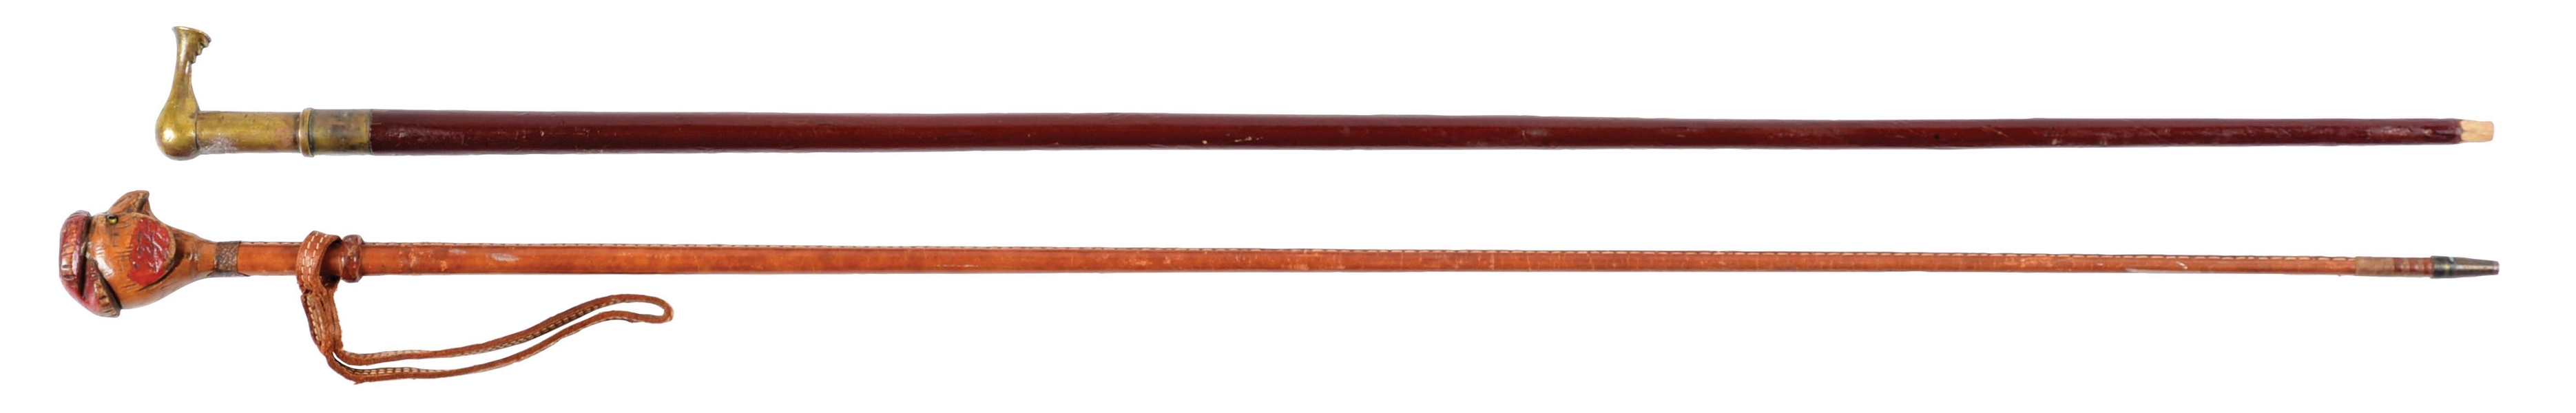 LOT OF 2: RIDING CROP CANE AND ROOSTER CANE.